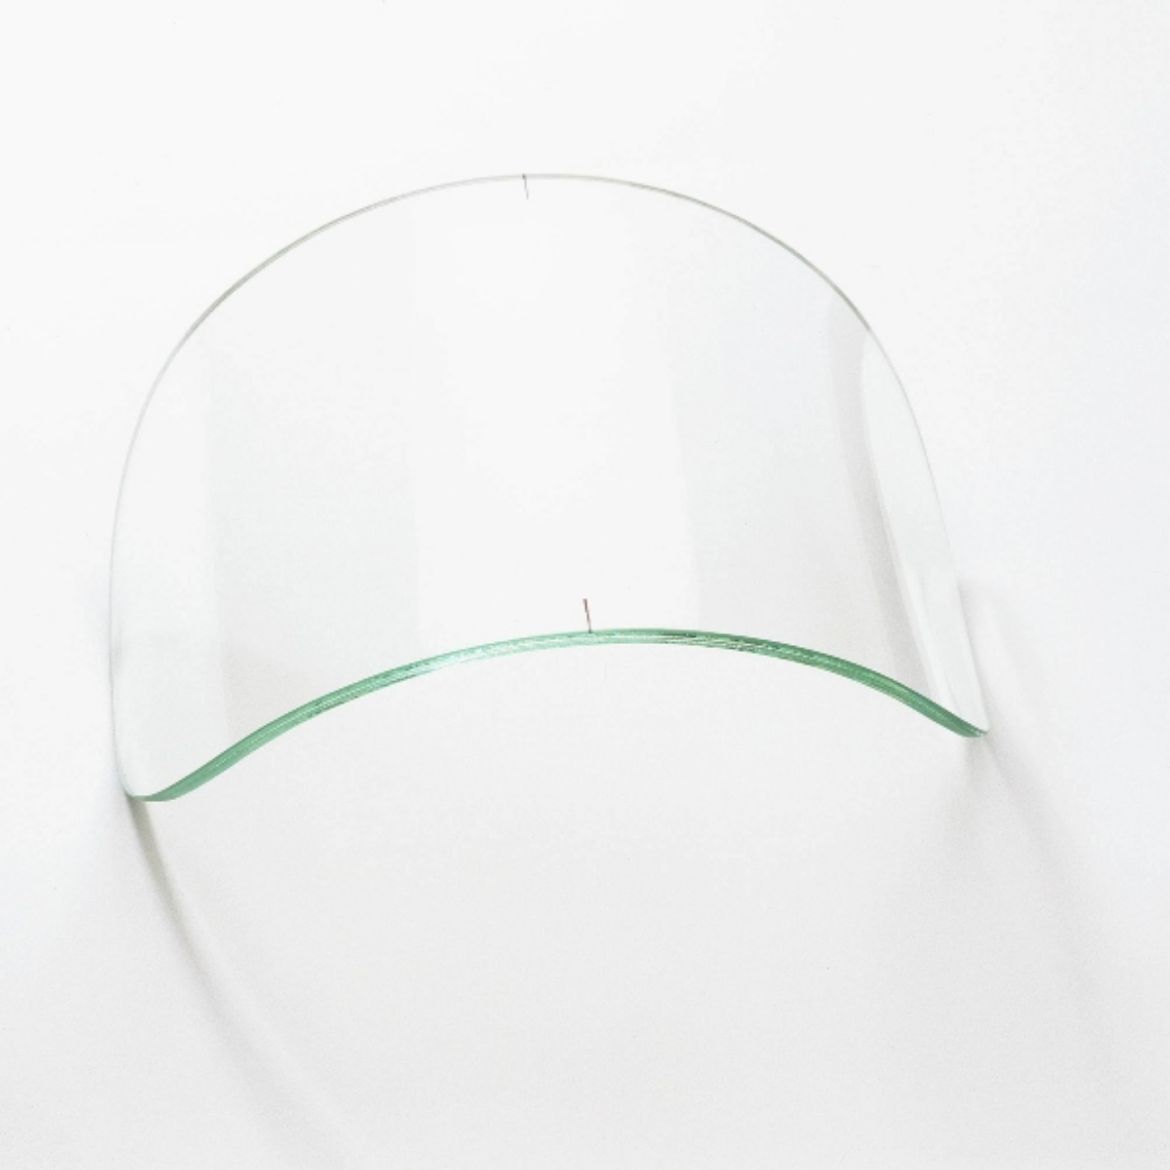 Picture of SR200 LAMINATED GLASS REPLACEMENT VISOR